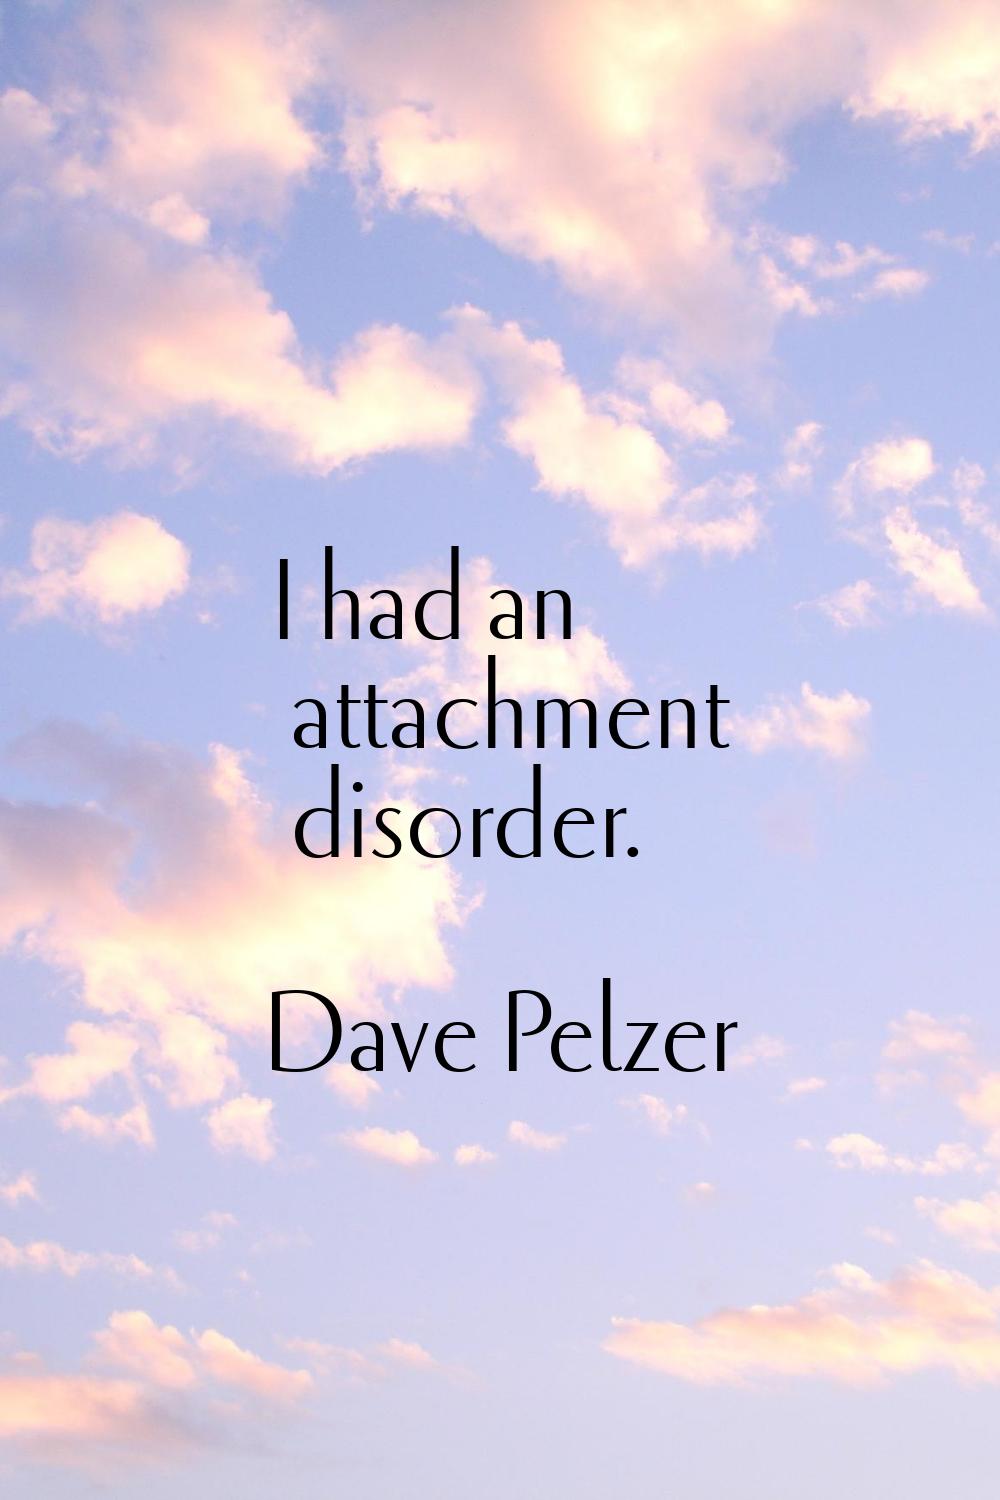 I had an attachment disorder.